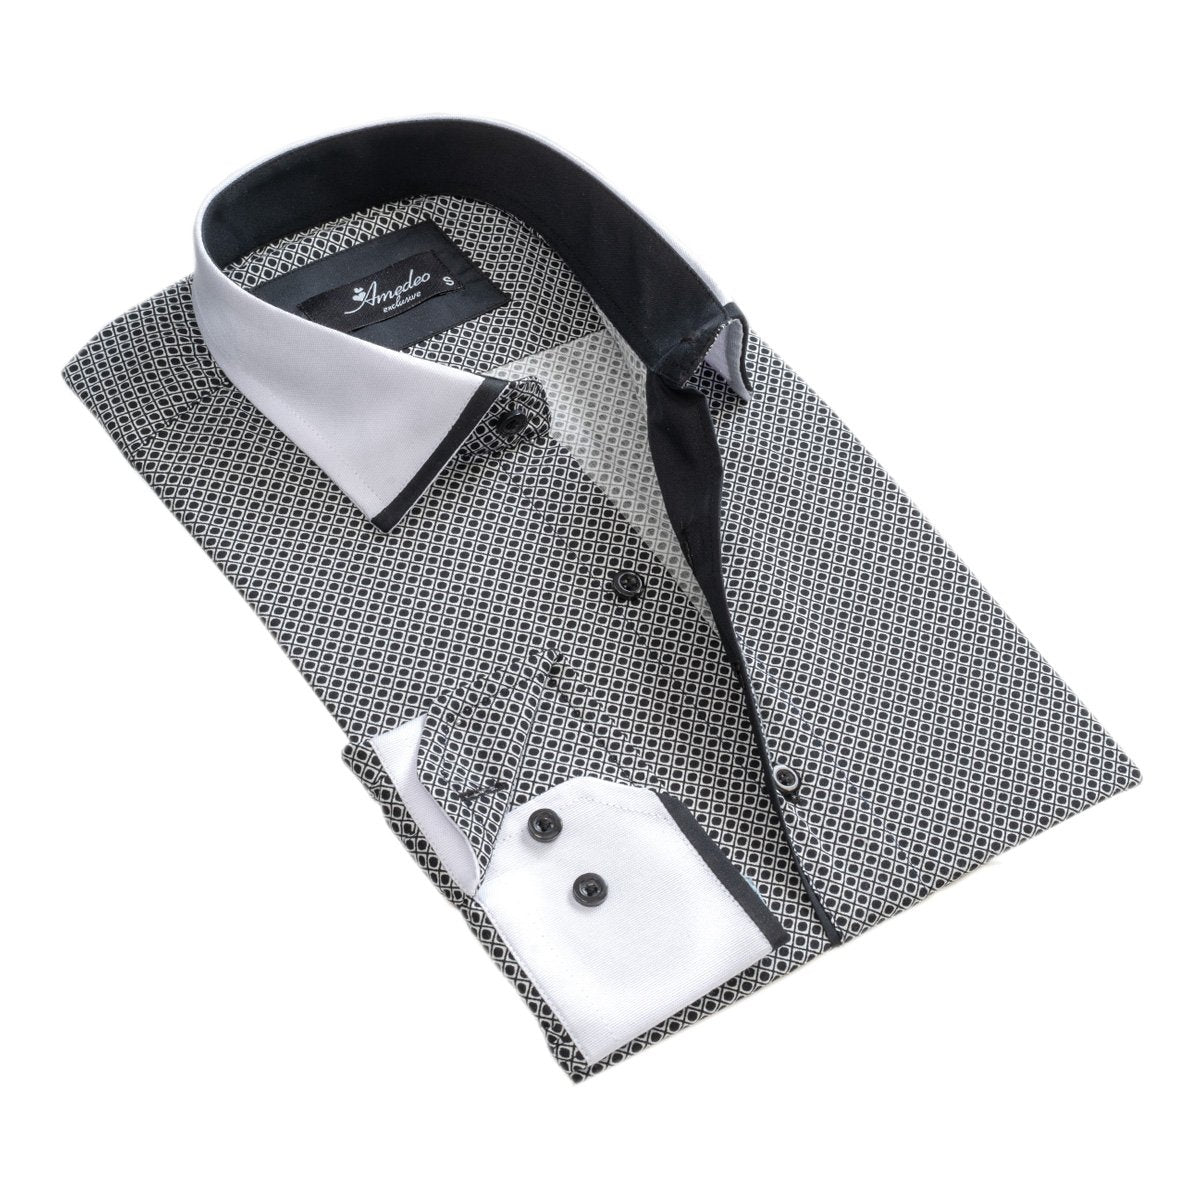 Cotton Casual Wear Mens Black And White Shirts